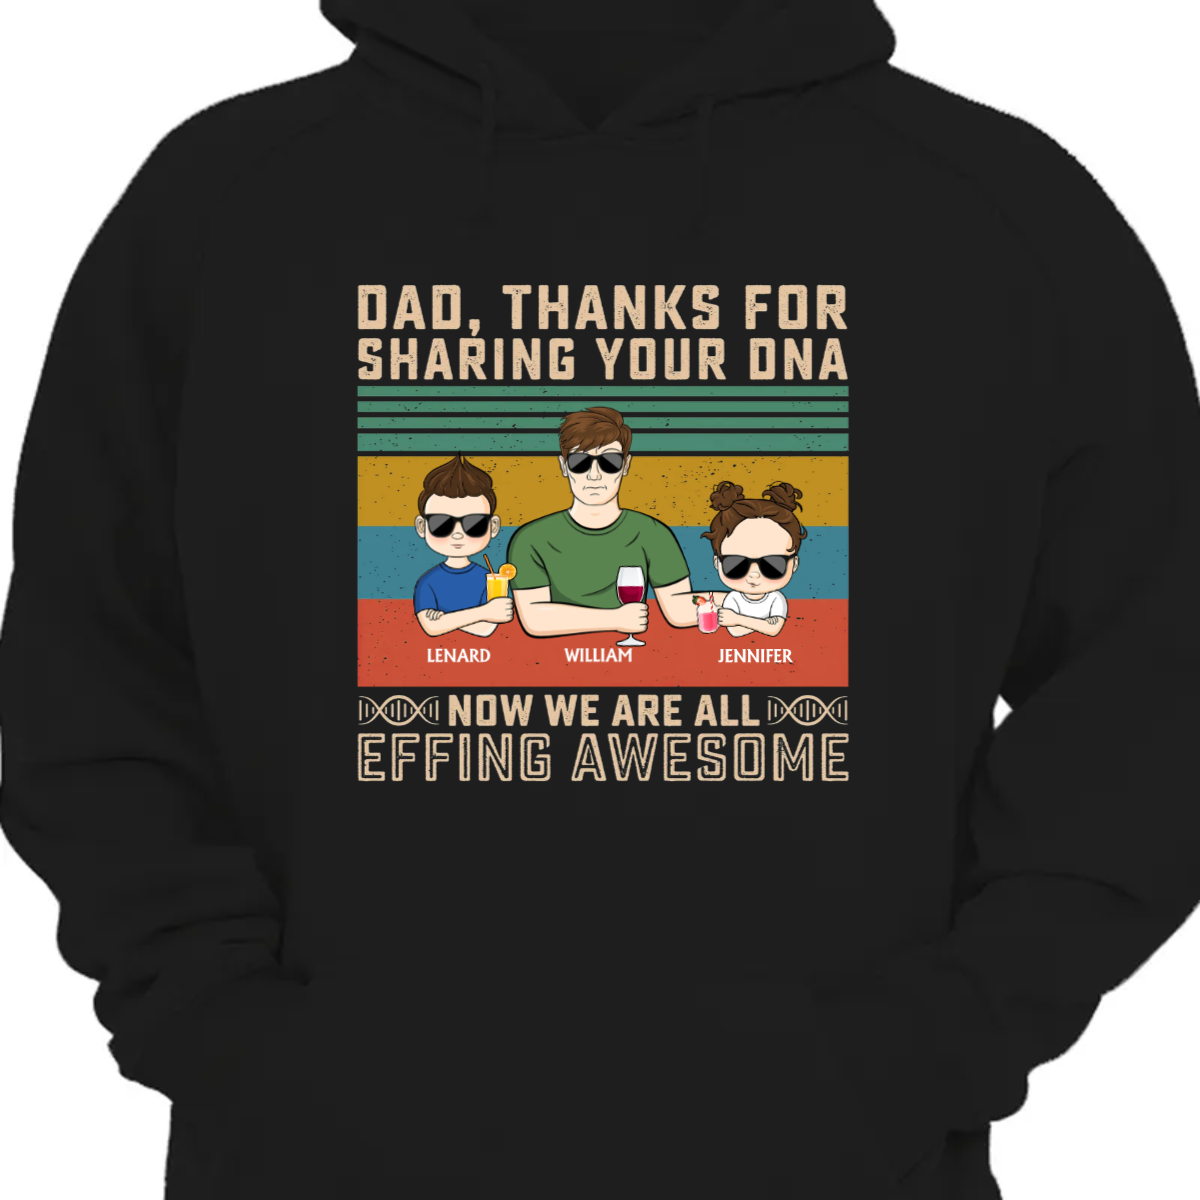 Dad Thanks For Sharing Your DNA - Father Gift - Personalized Custom Hoodie Sweatshirt